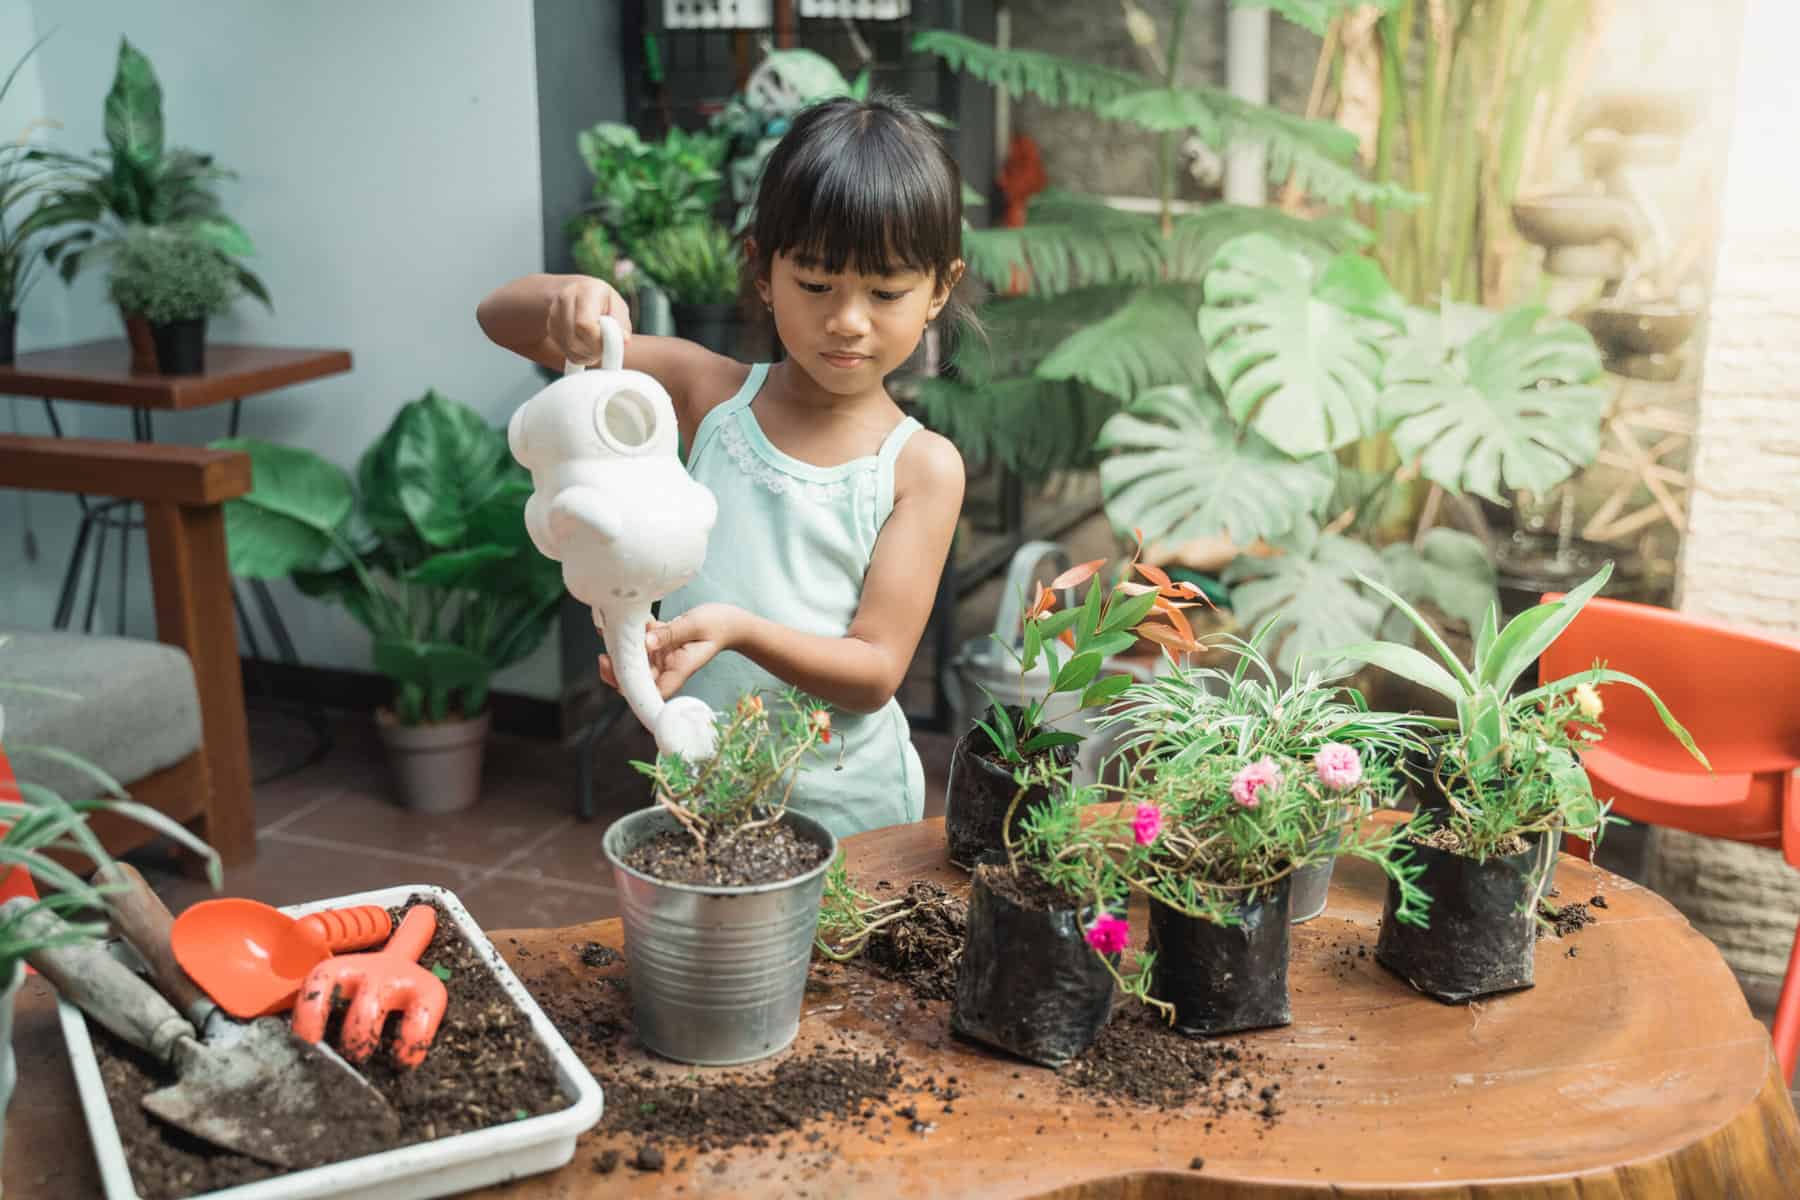 A student tending a garden as part of their Montessori homeschooling lessons